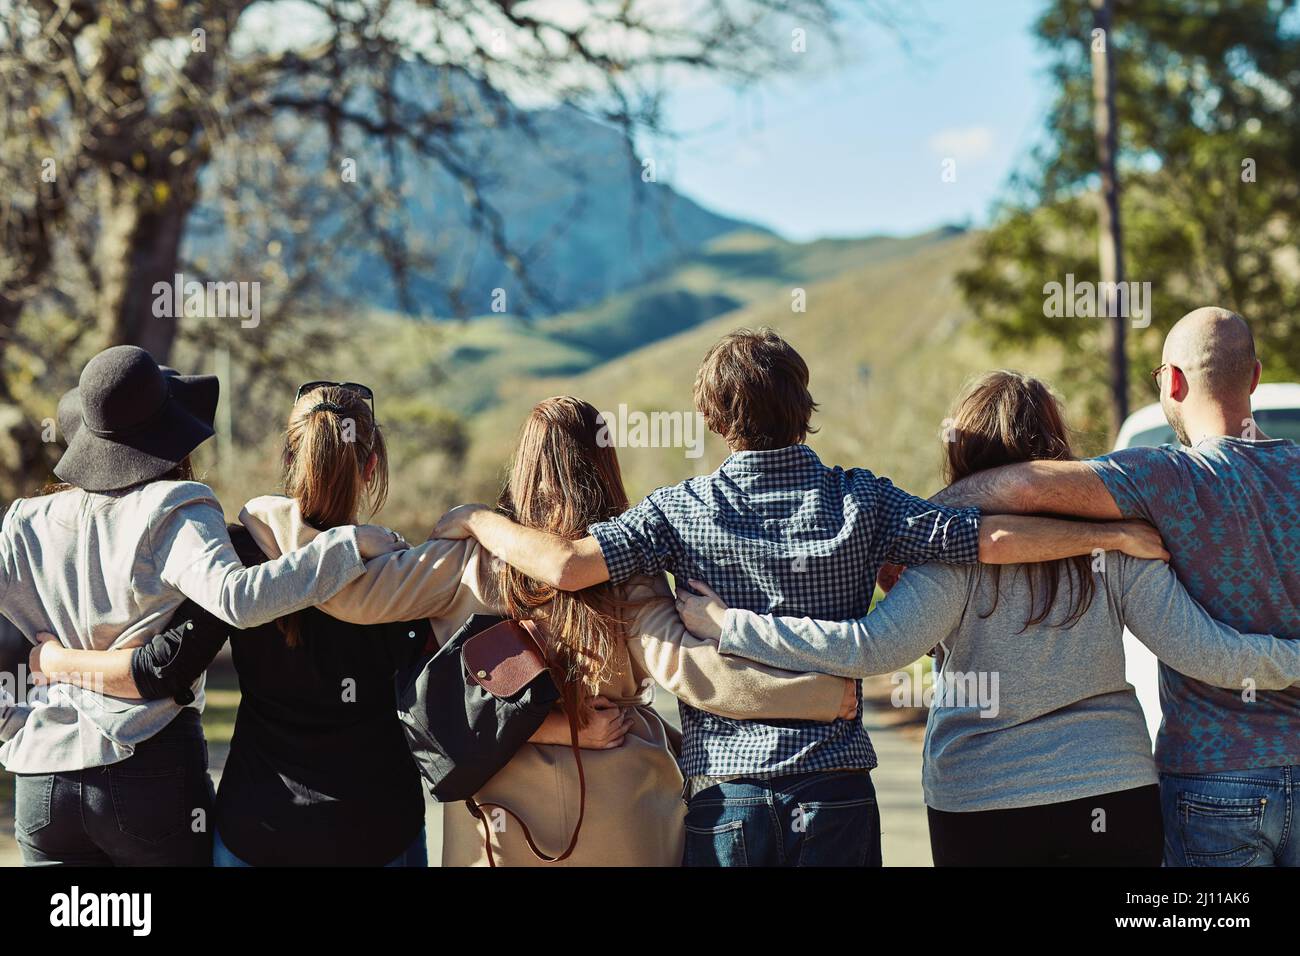 Seeing beautiful places with beautiful people. Rearview shot of a group of friends standing together. Stock Photo